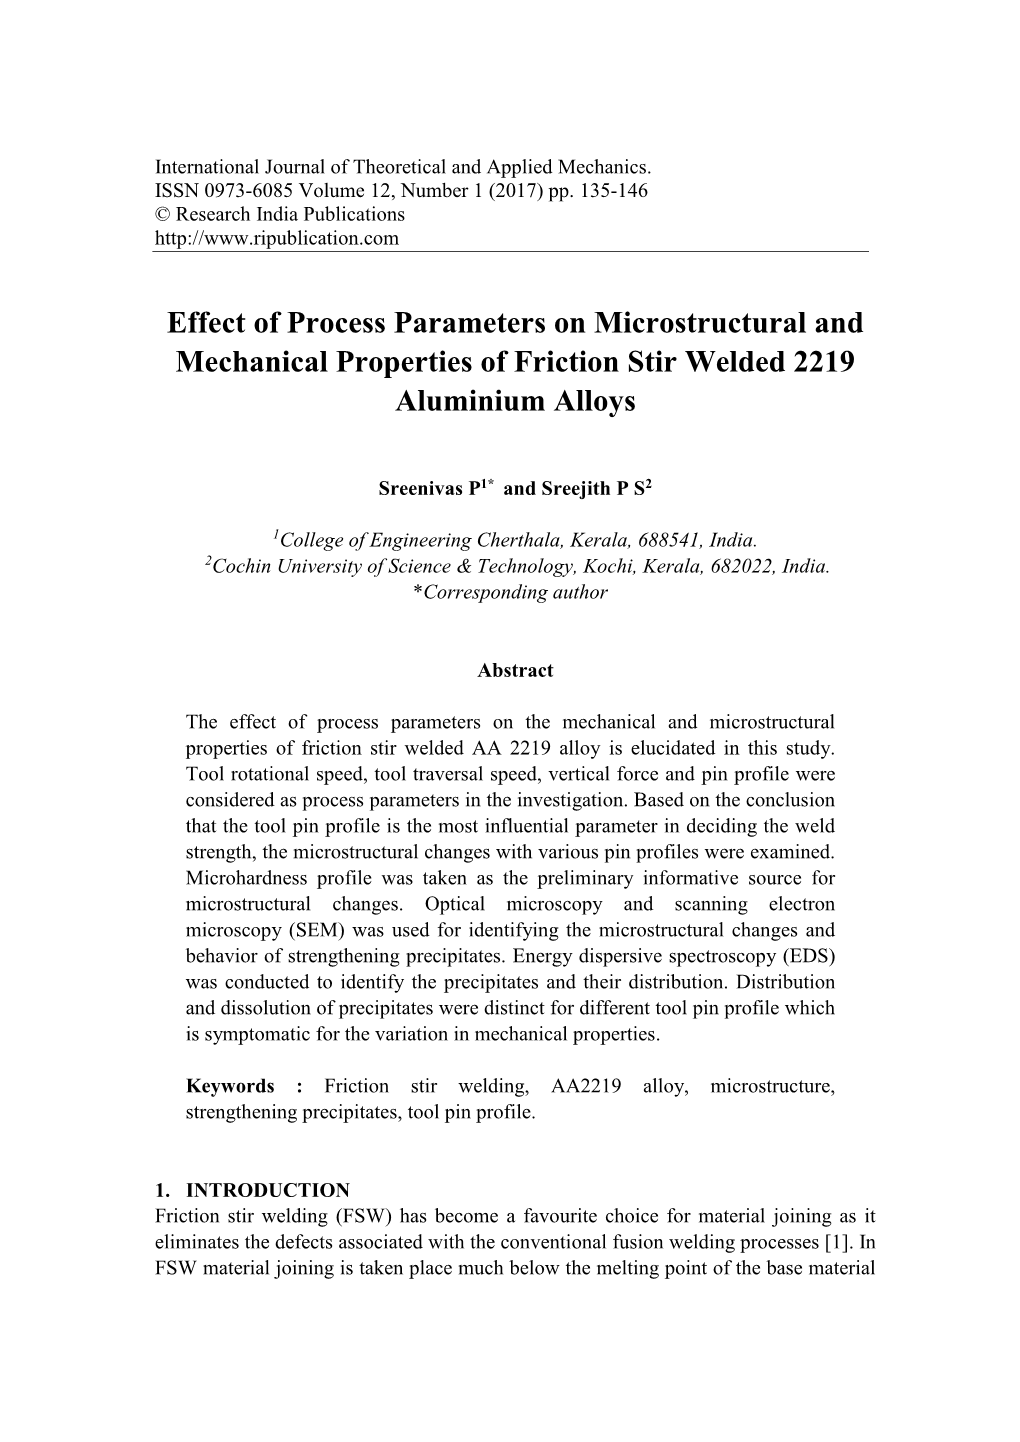 Effect of Process Parameters on Microstructural and Mechanical Properties of Friction Stir Welded 2219 Aluminium Alloys